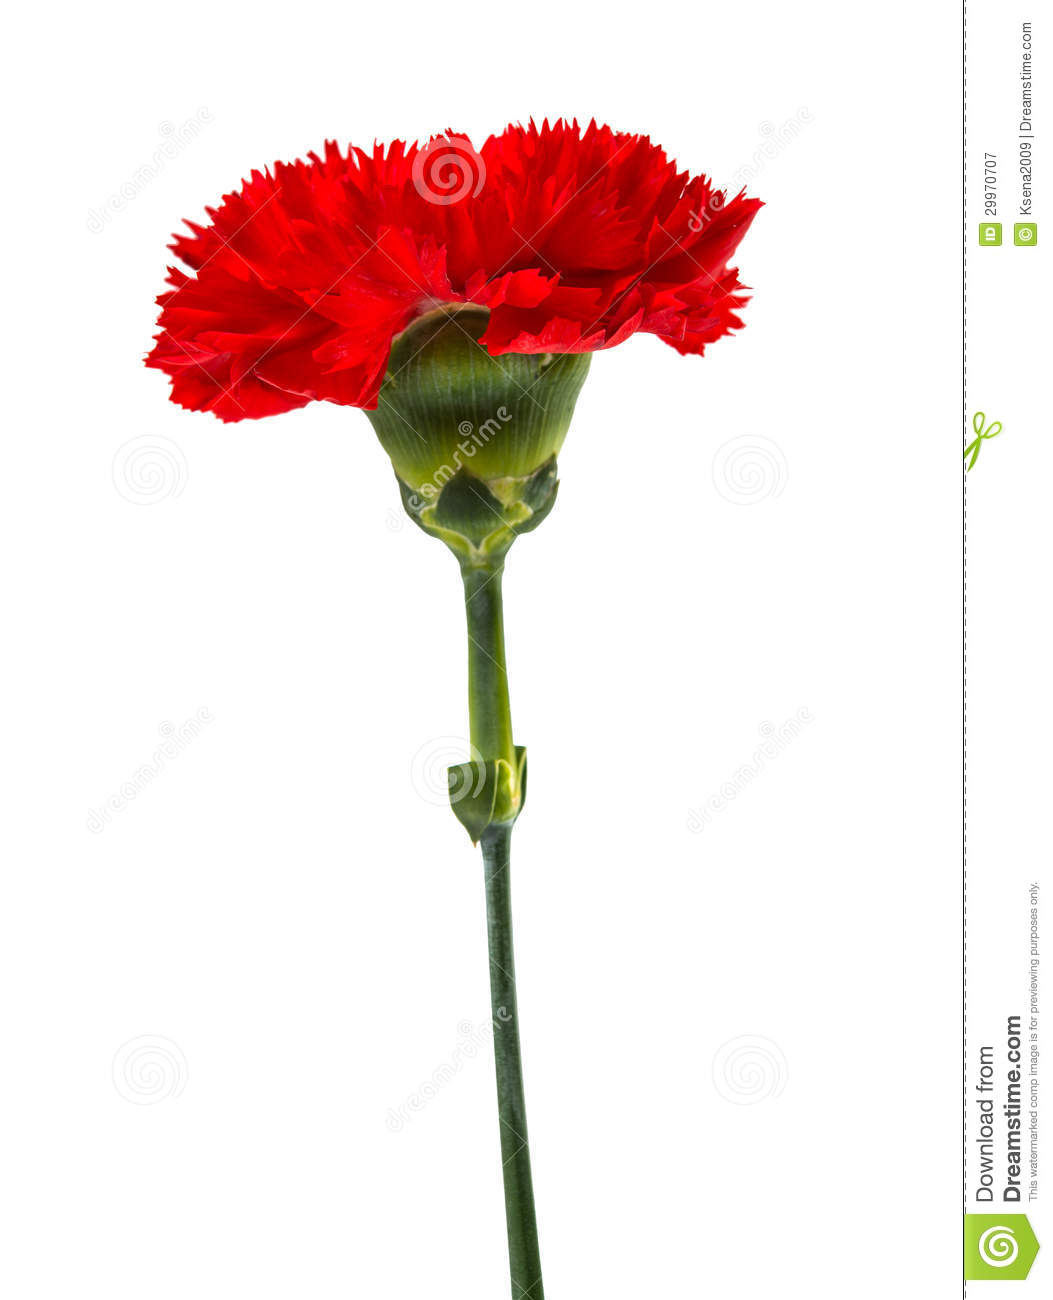 Red Carnation Close Up Royalty Free Stock Photography   Image